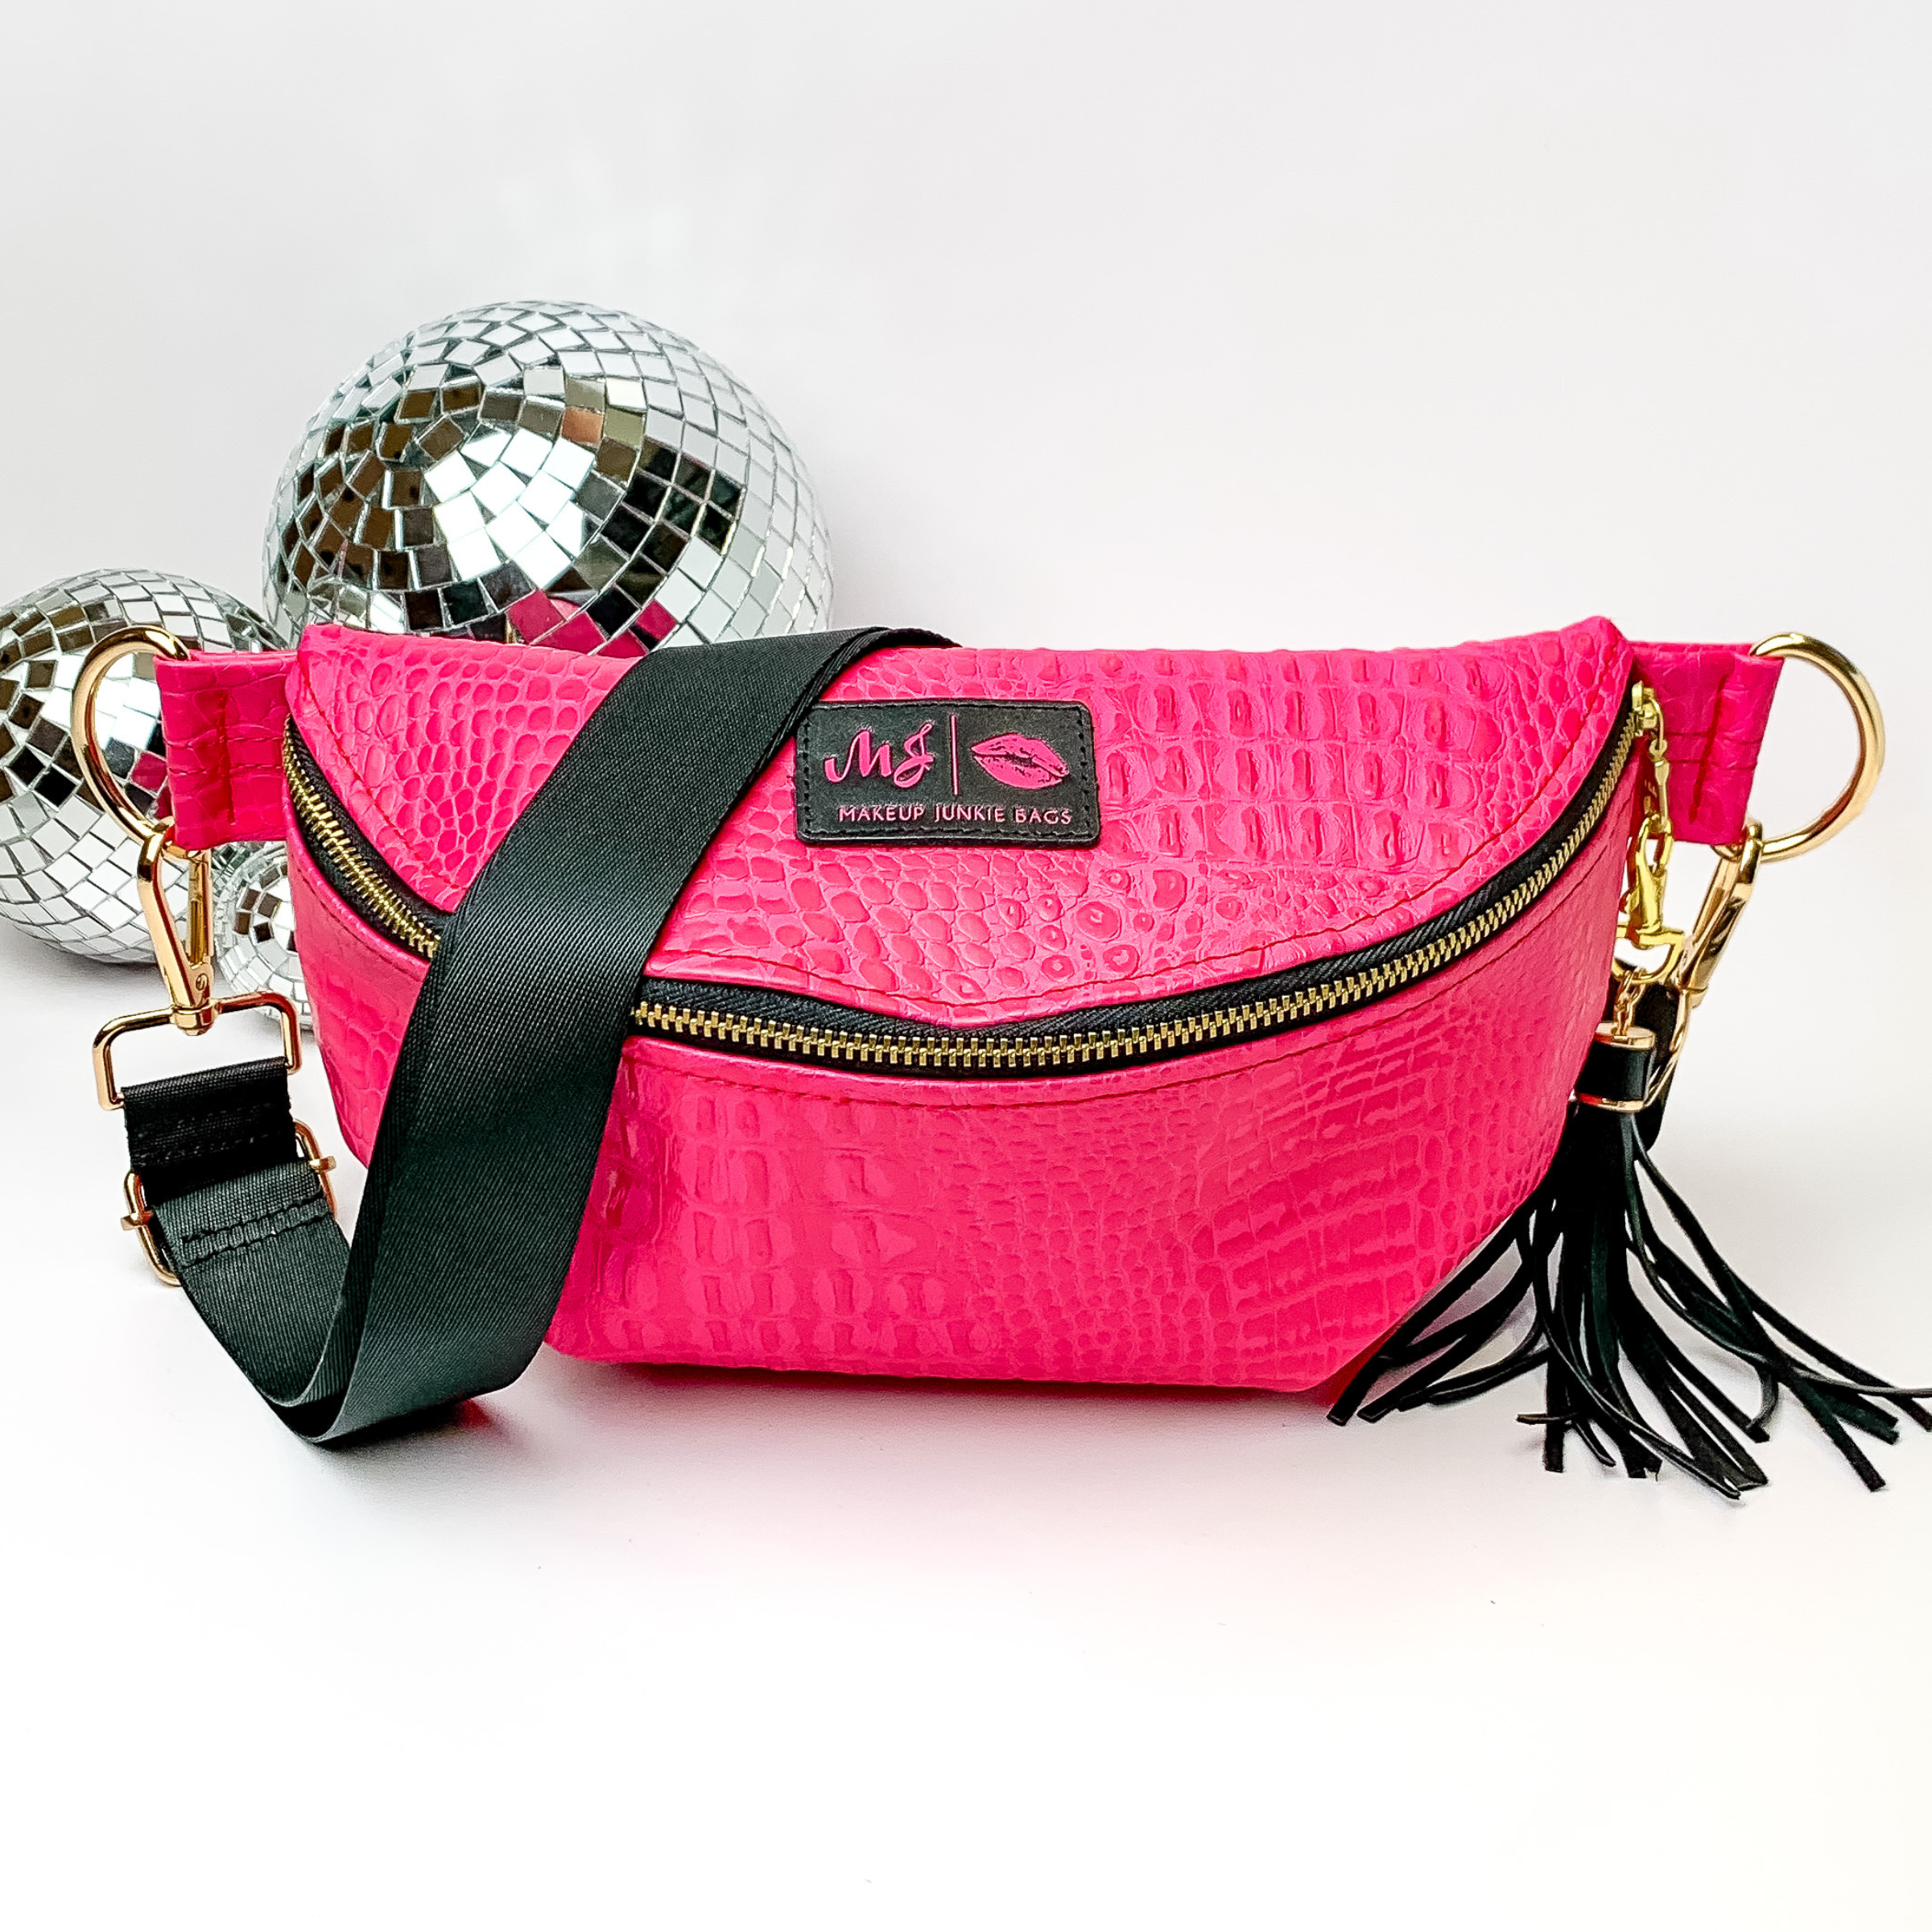 Hot pink, croc print fanny pack with a black strap. This bag includes gold accents, a gold zipper, and a gold tassel. This bag also has a pink stitched logo for Makeup Junkie. This fanny pack is pictured on a white background in front of disco balls. 